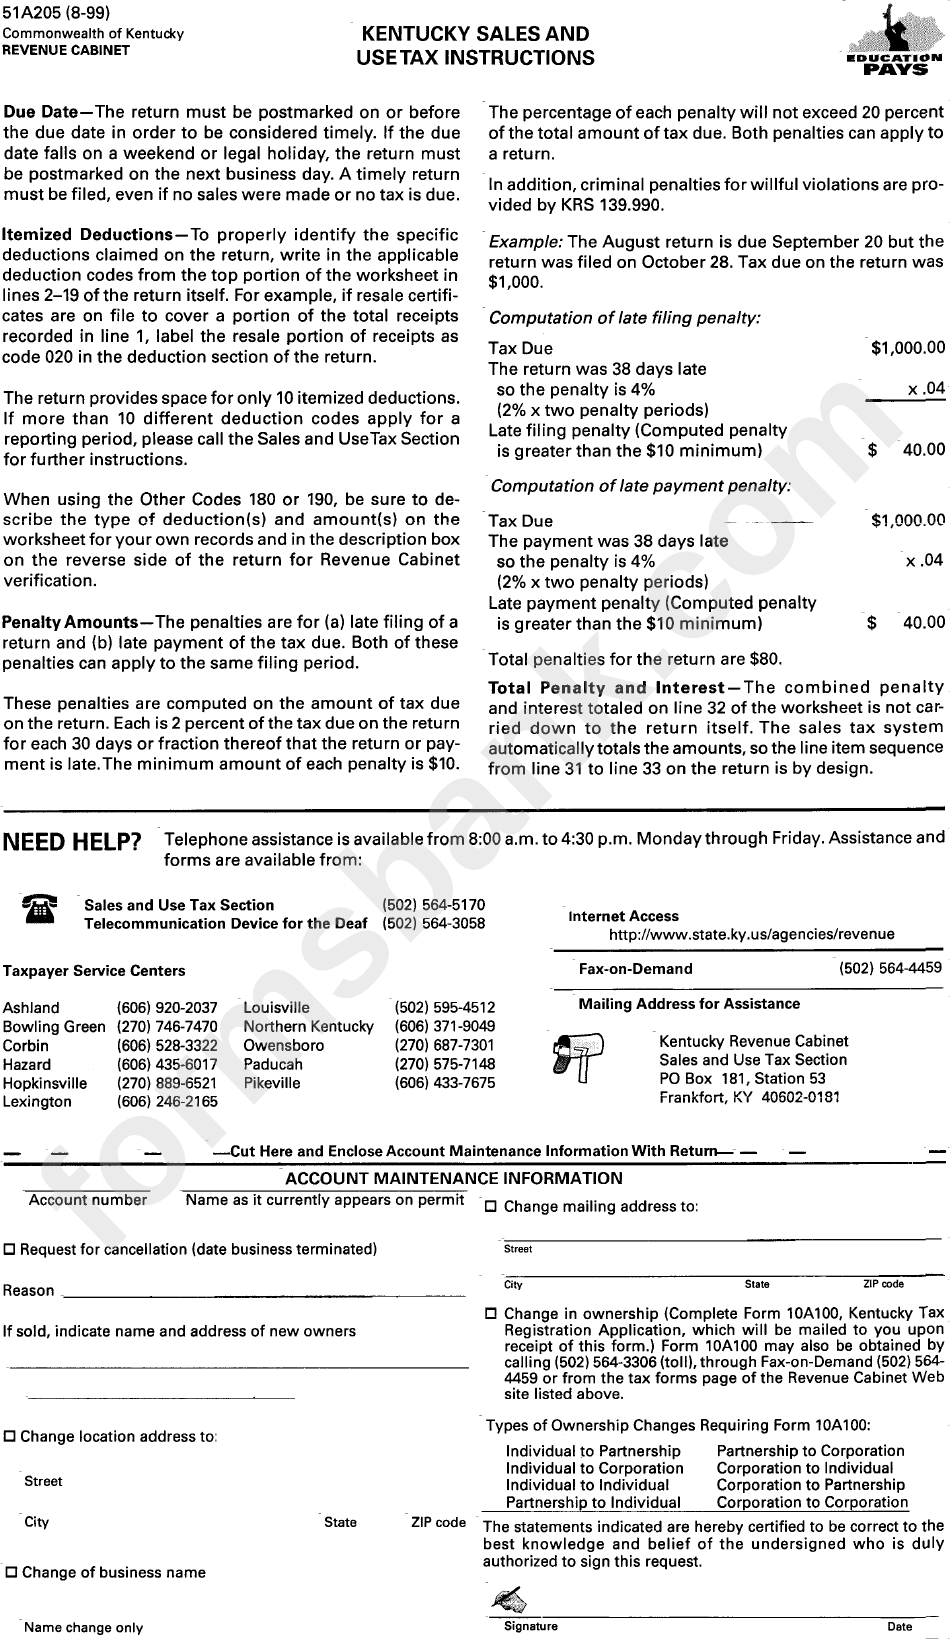 Form 51a205 - Account Maintenance Information For Kentucky Sales And Use Tax